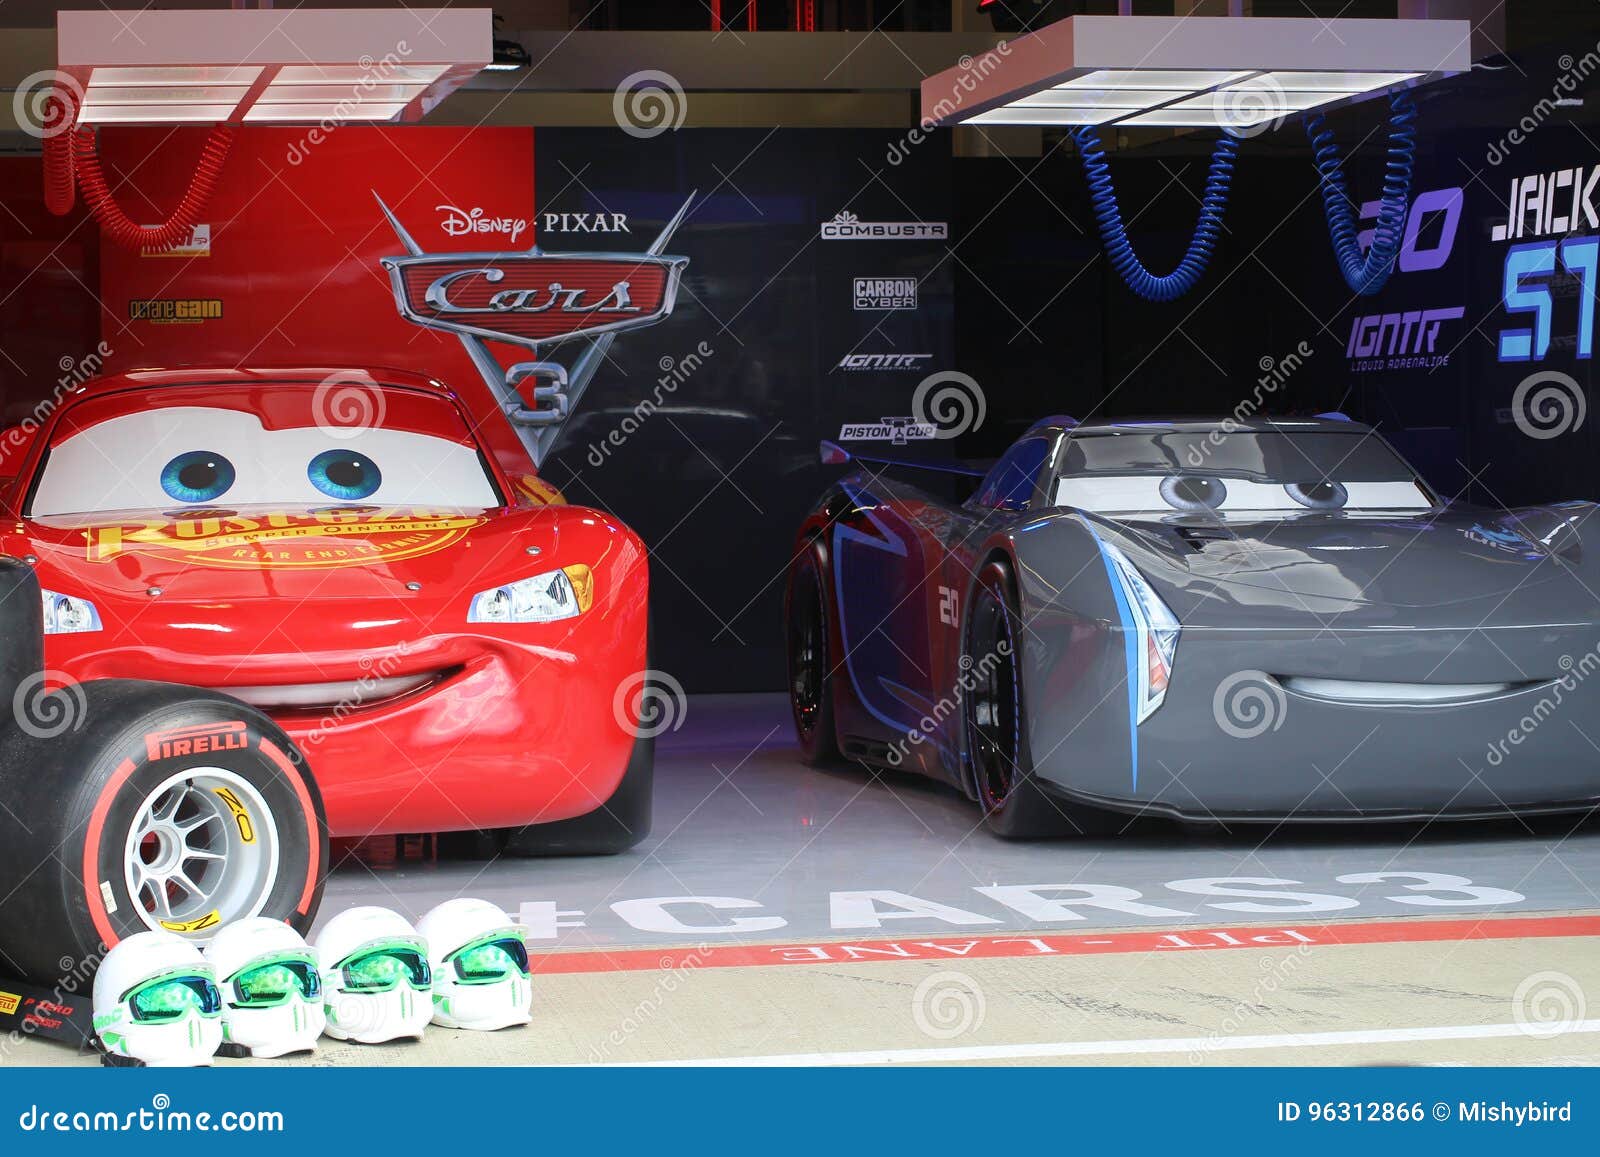 Jackson Storm and Lightning Mcqueen Editorial Photo - Image of raceway,  driving: 96312866